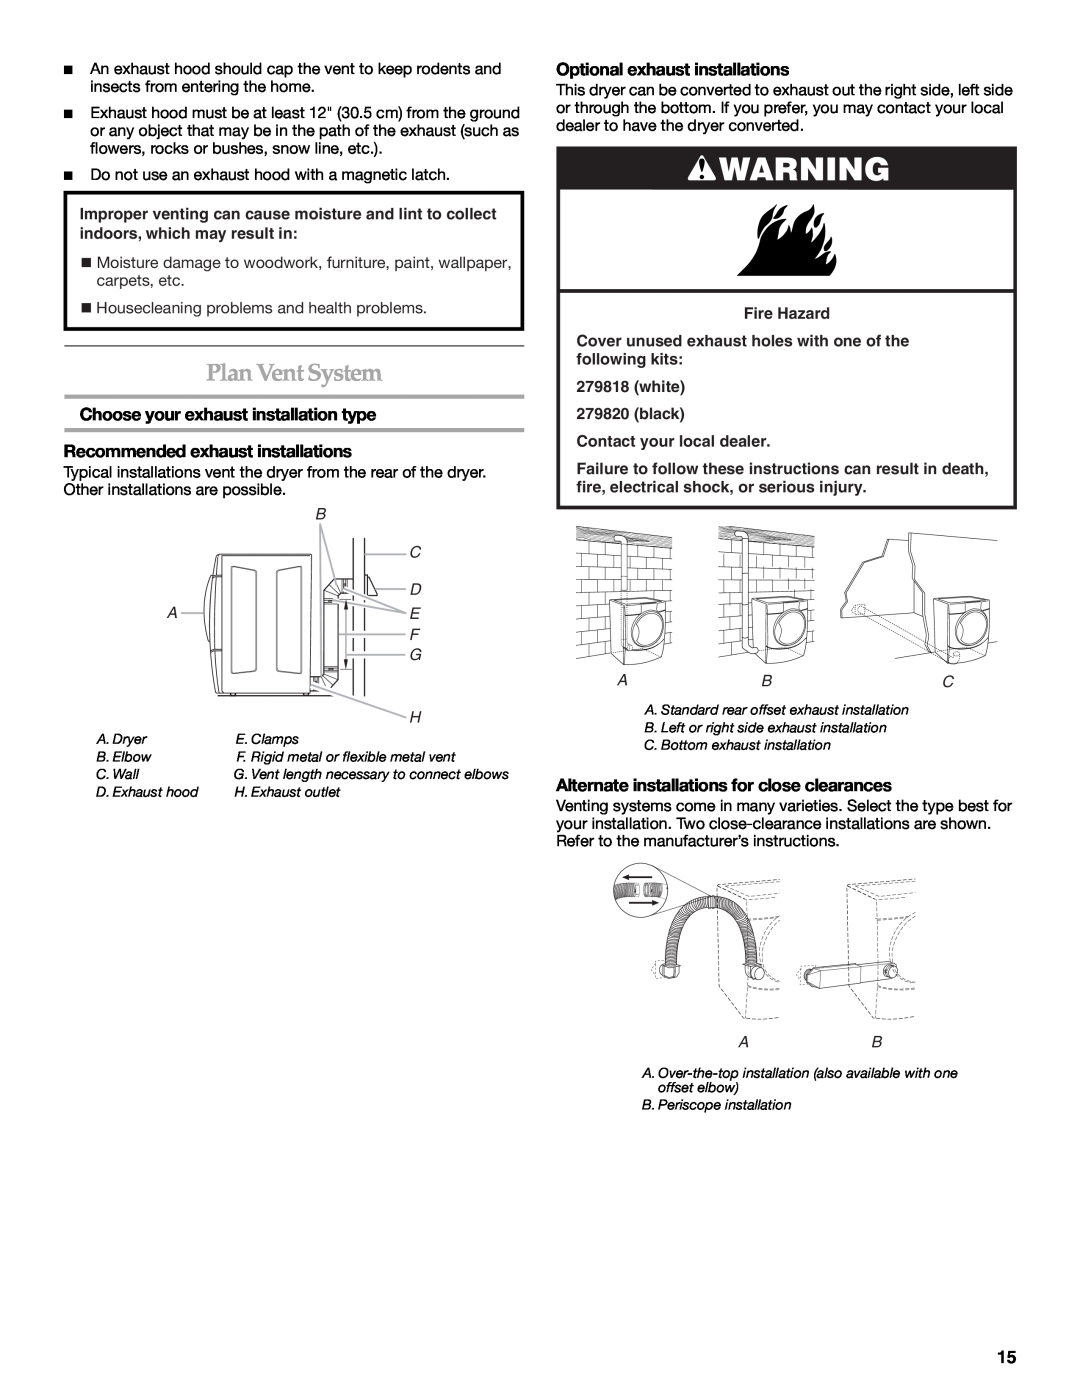 Maytag W10099070 manual Plan Vent System, Choose your exhaust installation type, Recommended exhaust installations 